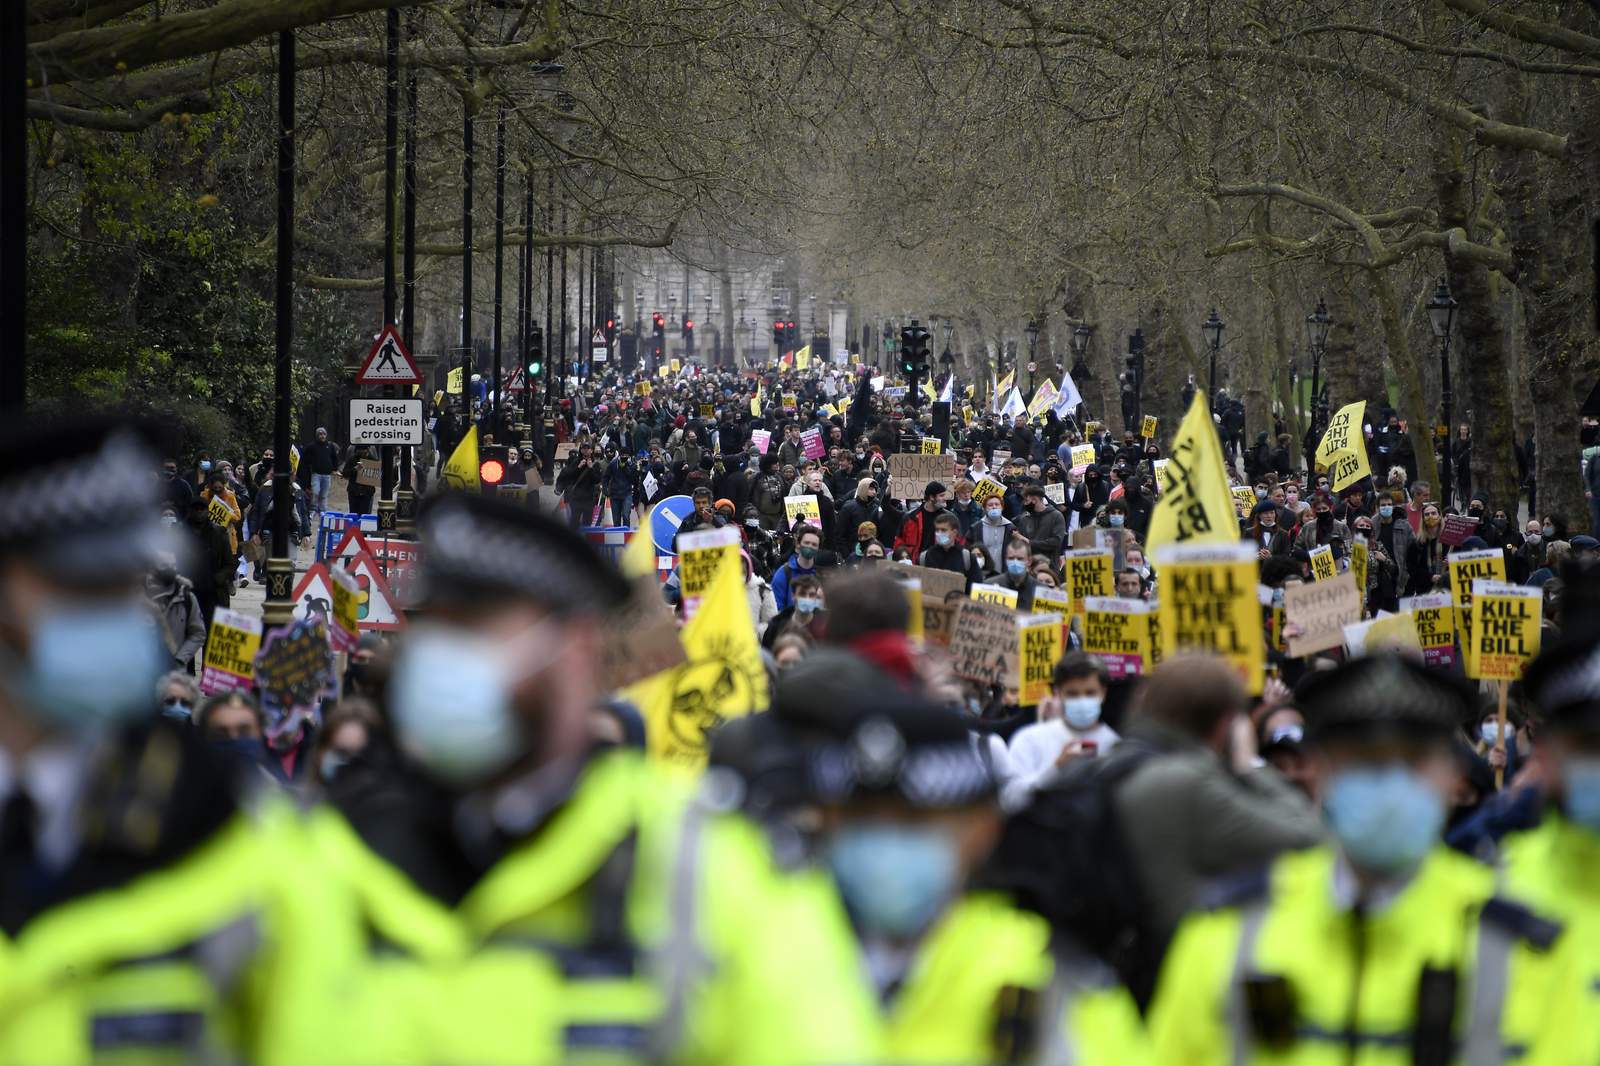 Hundreds rally in England and Wales over police legislation